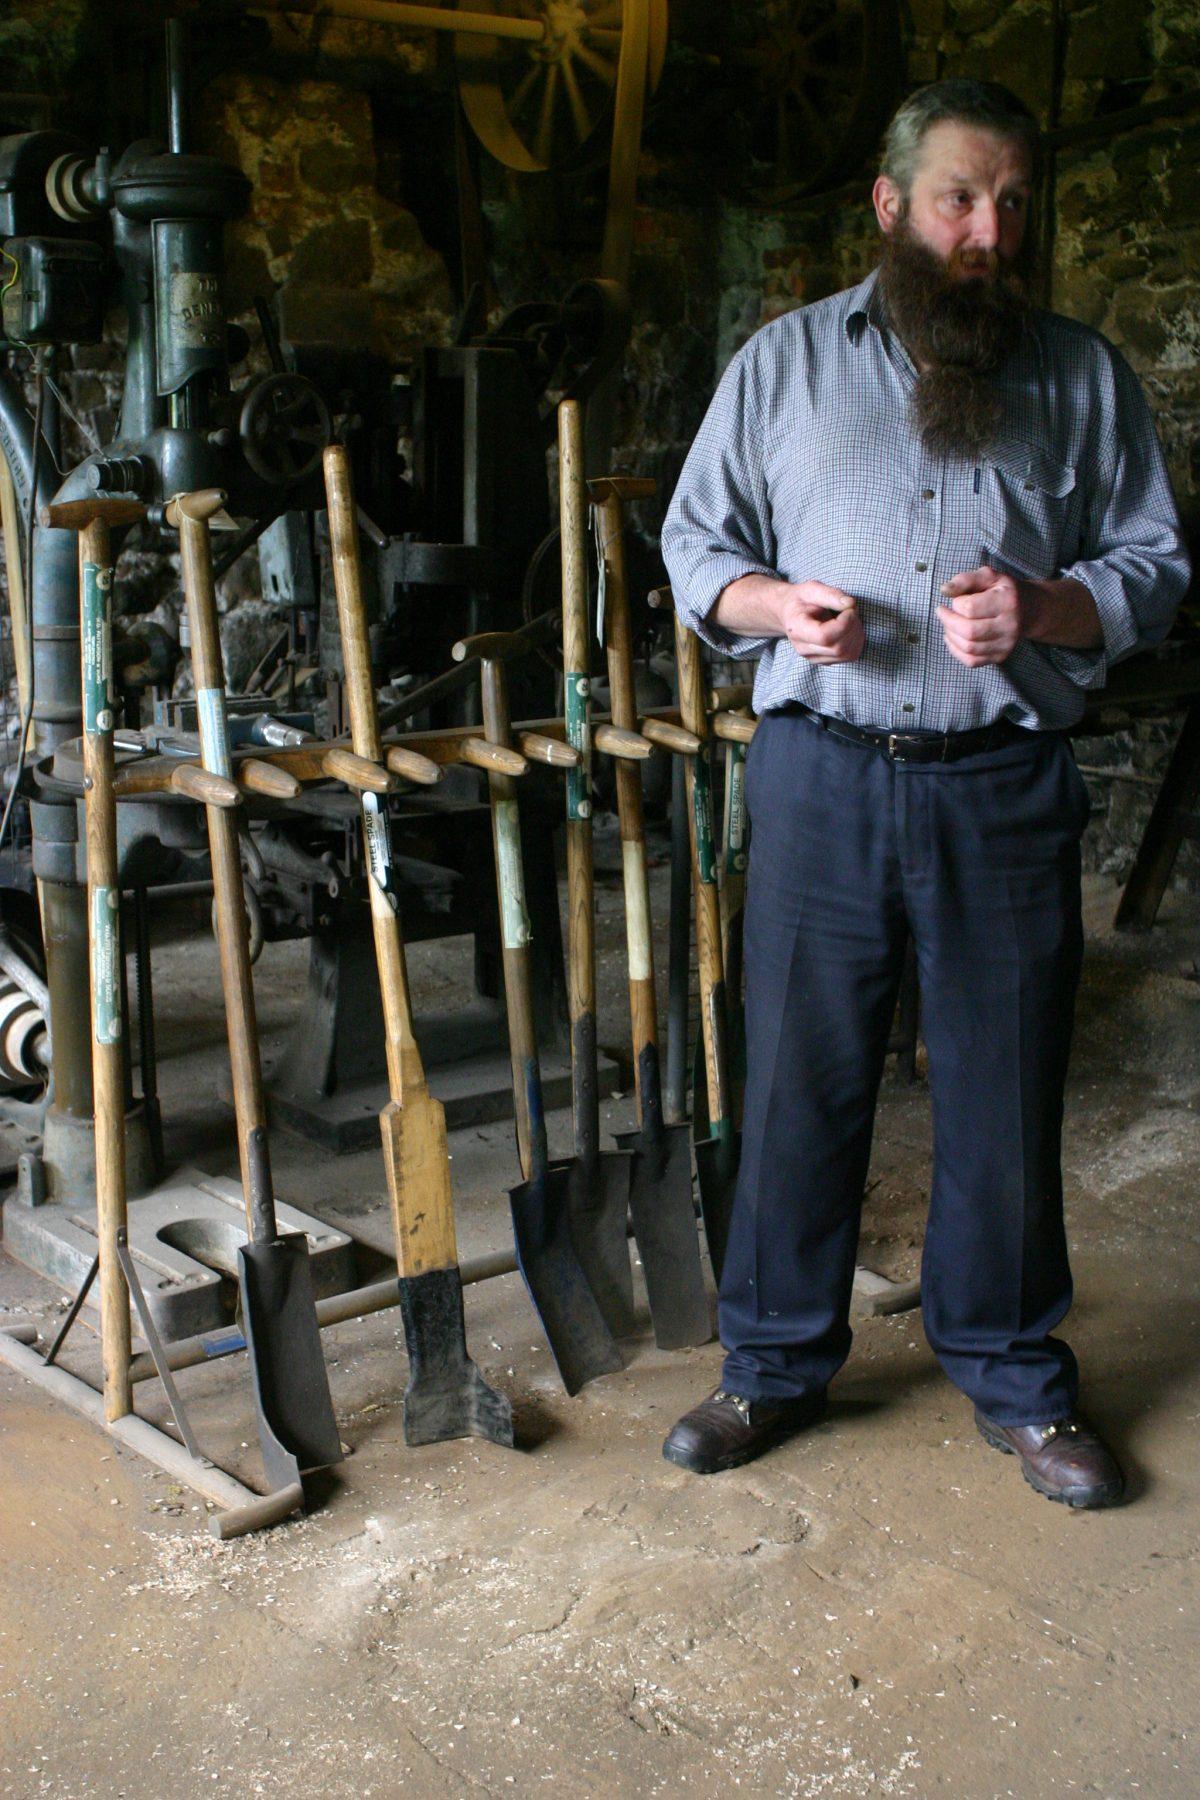 Spade making at Patterson’s Spade Mill. Spade making (forged heads) is critically endangered. (Robin Wood)